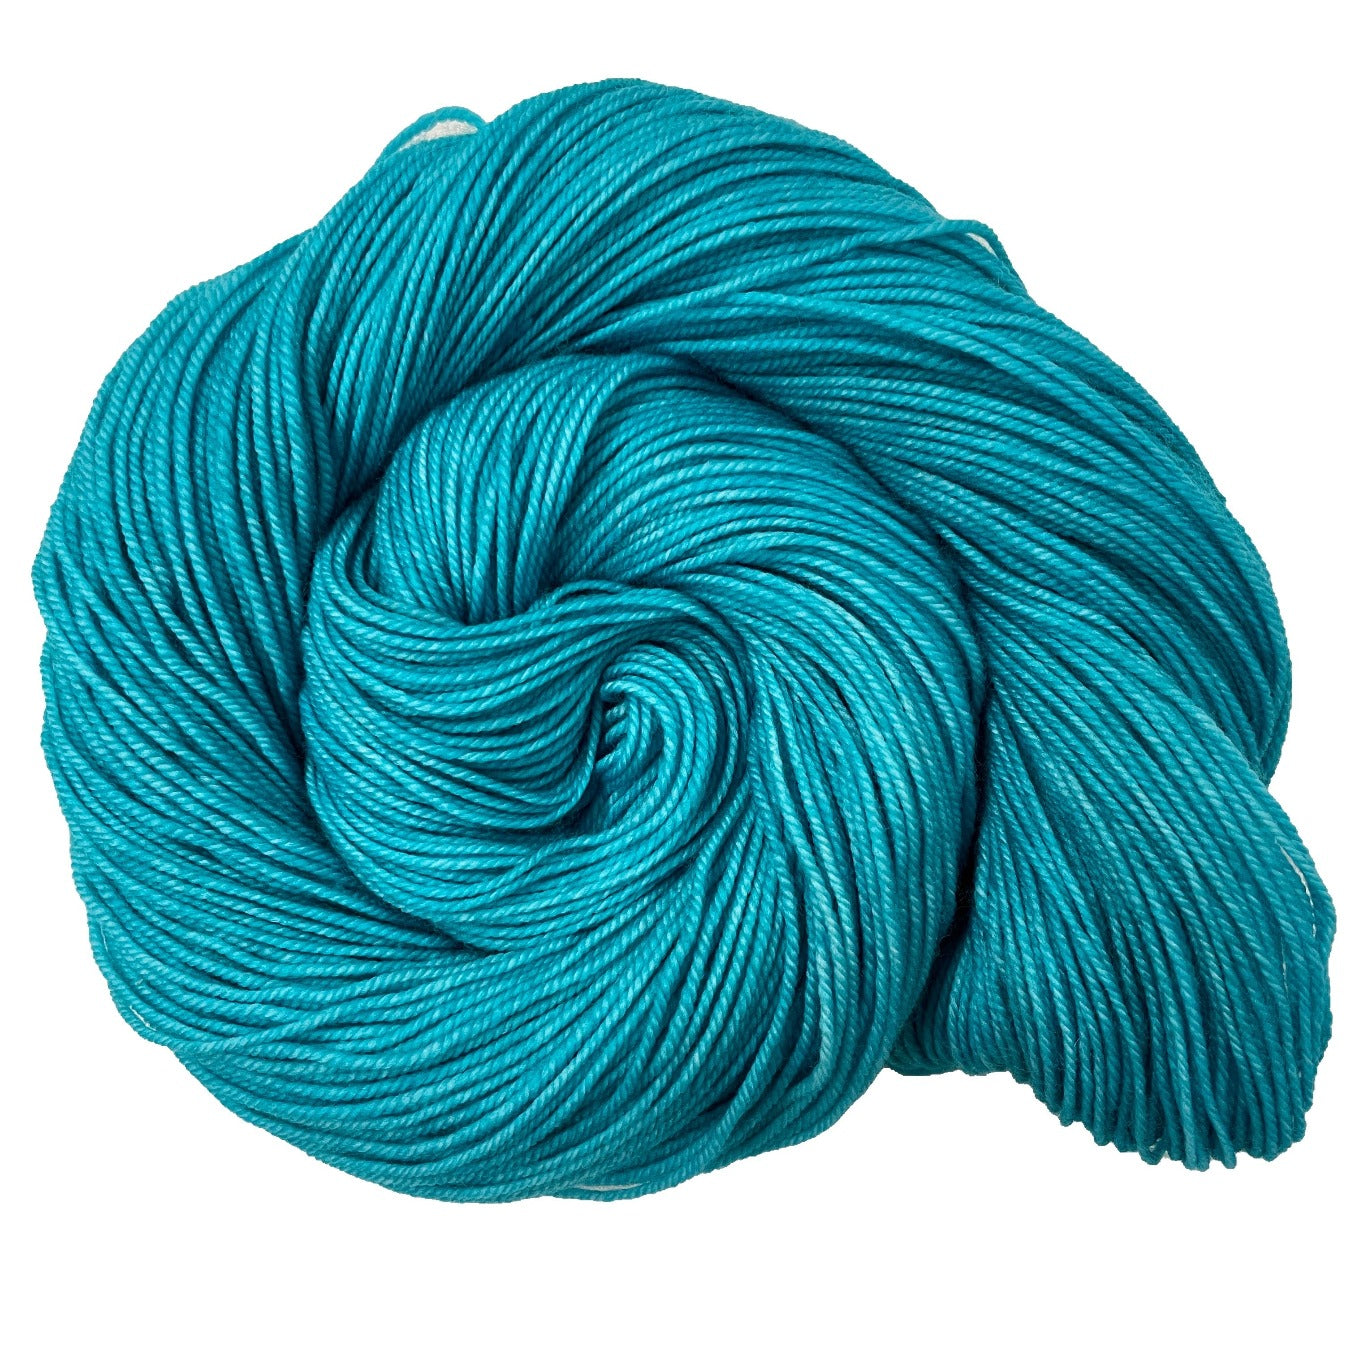 Photo of the Turquoise colorway by Knitted Wit Sport